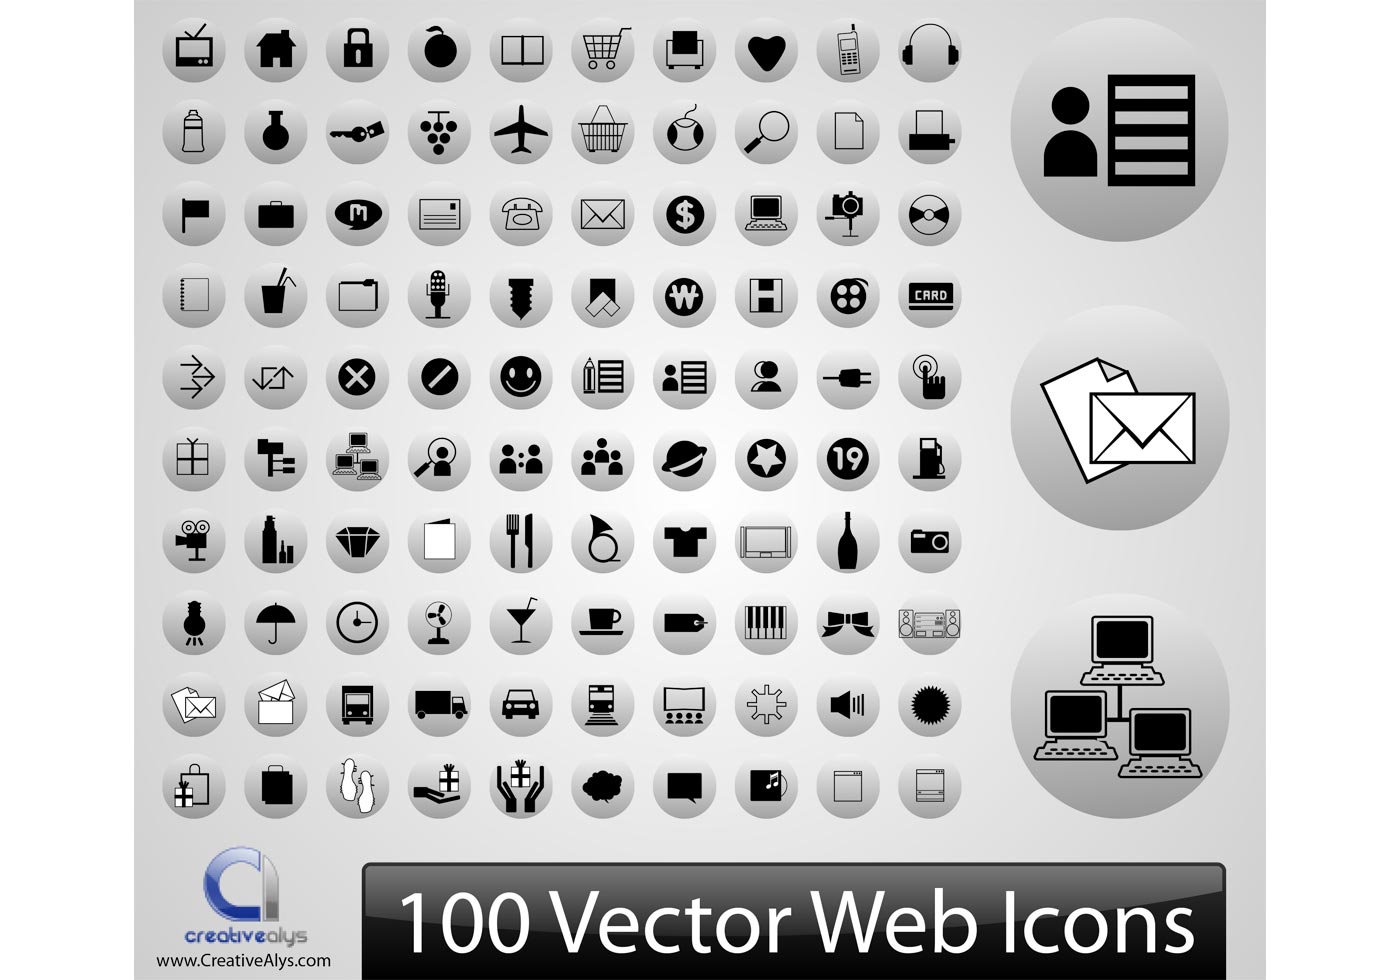 Download 100 Vector Web Icons - Download Free Vector Art, Stock ...